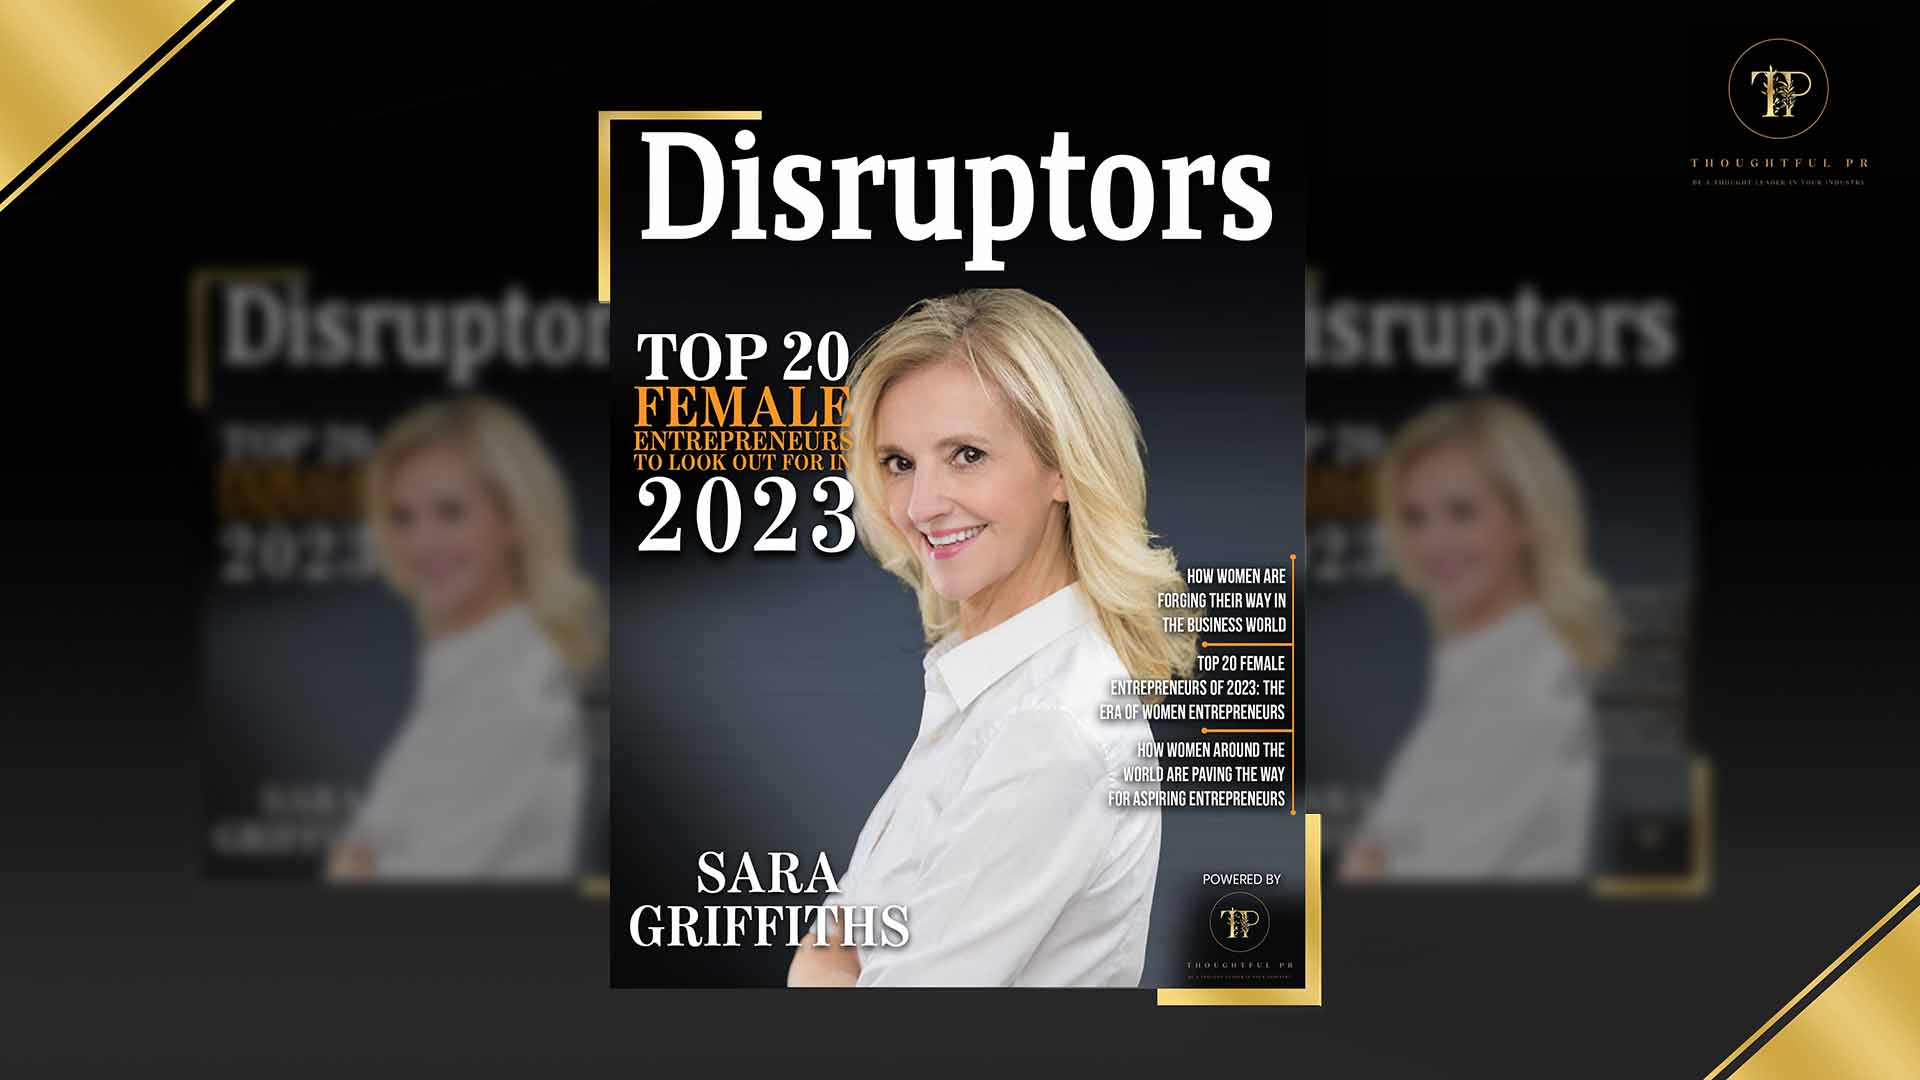 Disruptors – Sara Griffiths features as a Top 20 Female Entrepreneur for 2023